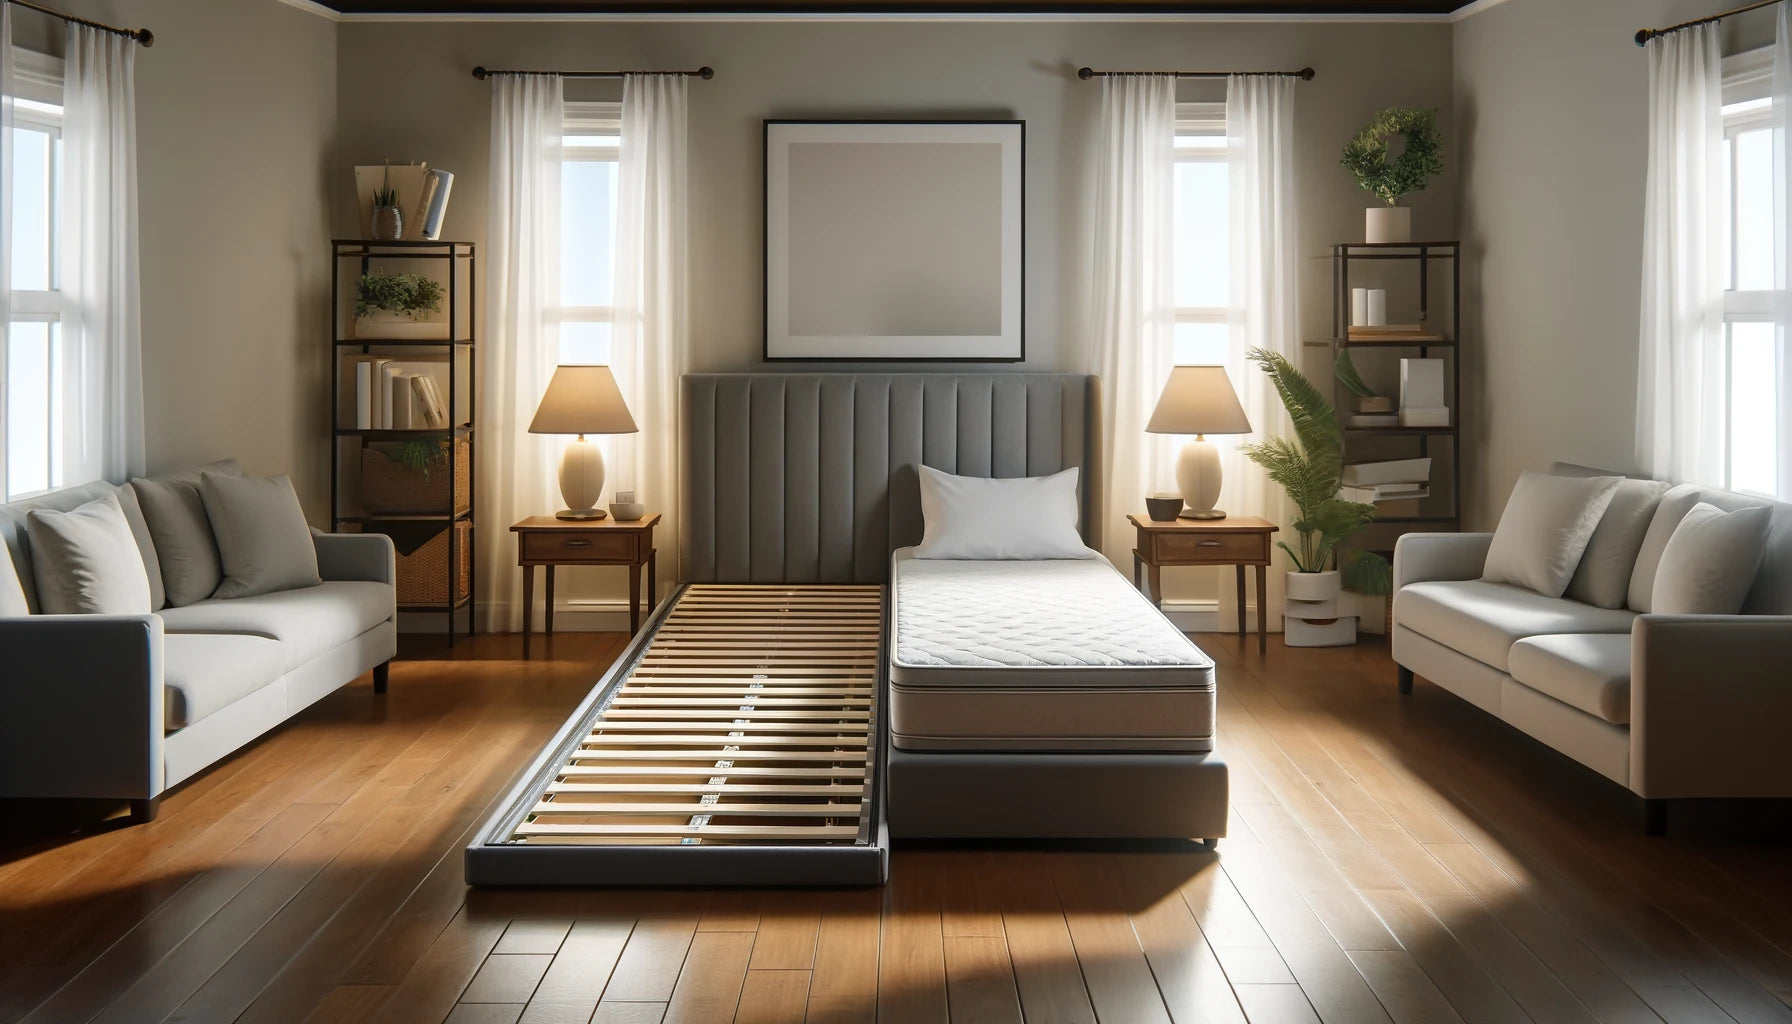 Bunkie Board vs Box Spring: Which is Right for You?